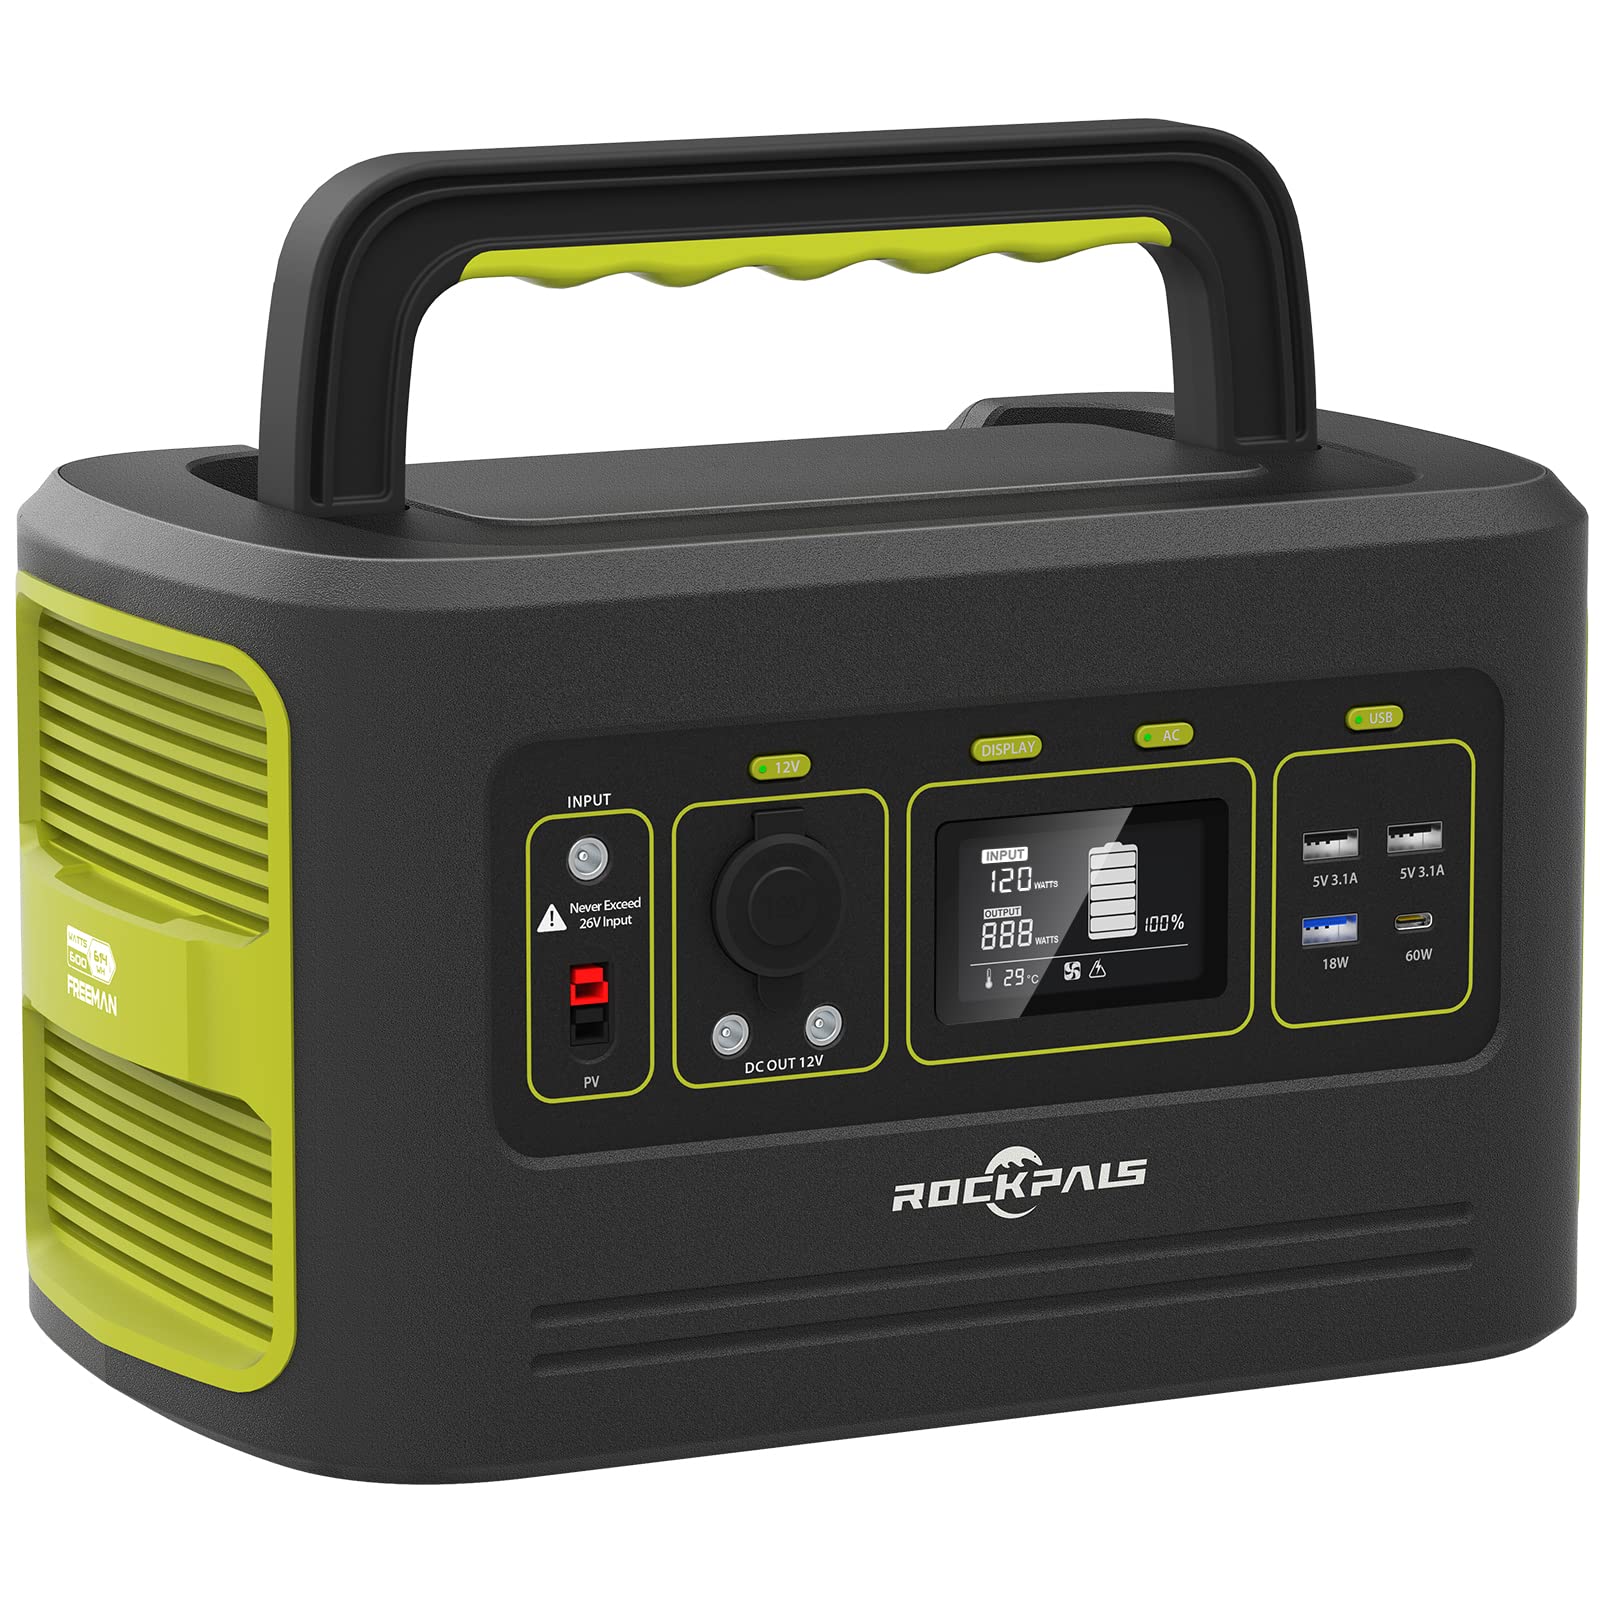 ROCKPALS Freeman 600W 614.4Wh Solar-capable Portable Power Station w/ LiFePo4 $250.99 at Amazon